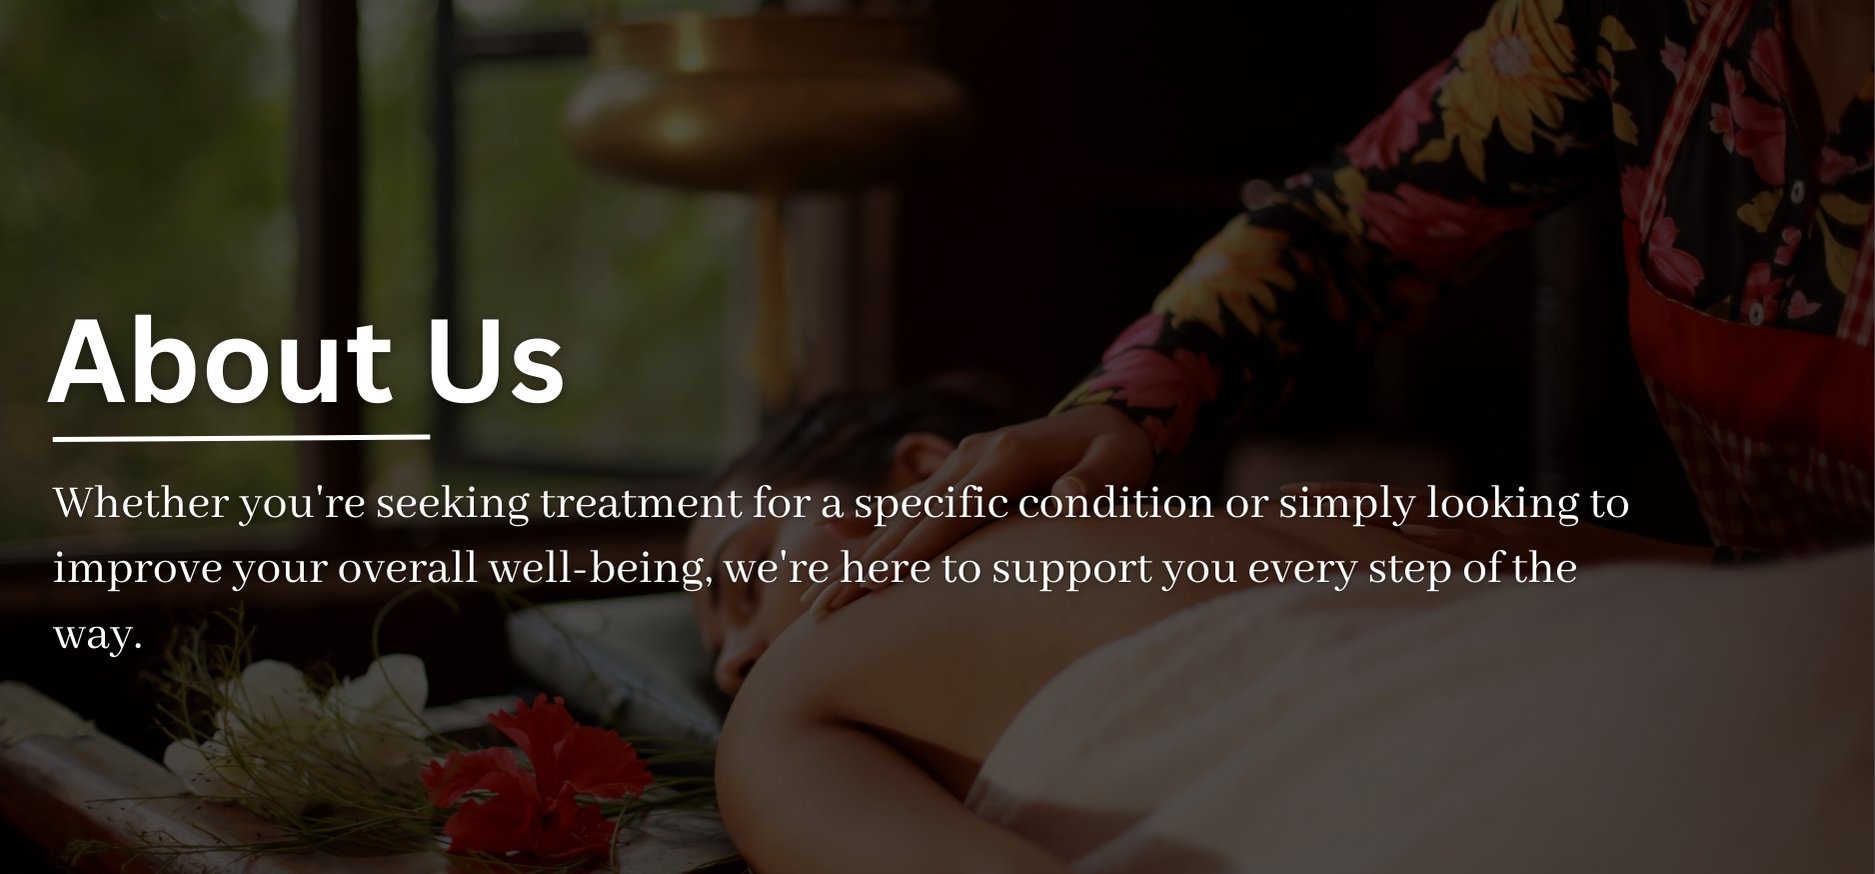 Whether you're seeking treatment for a specific condition or simply looking to improve your overall well-being, we're here to support you every step of the way.